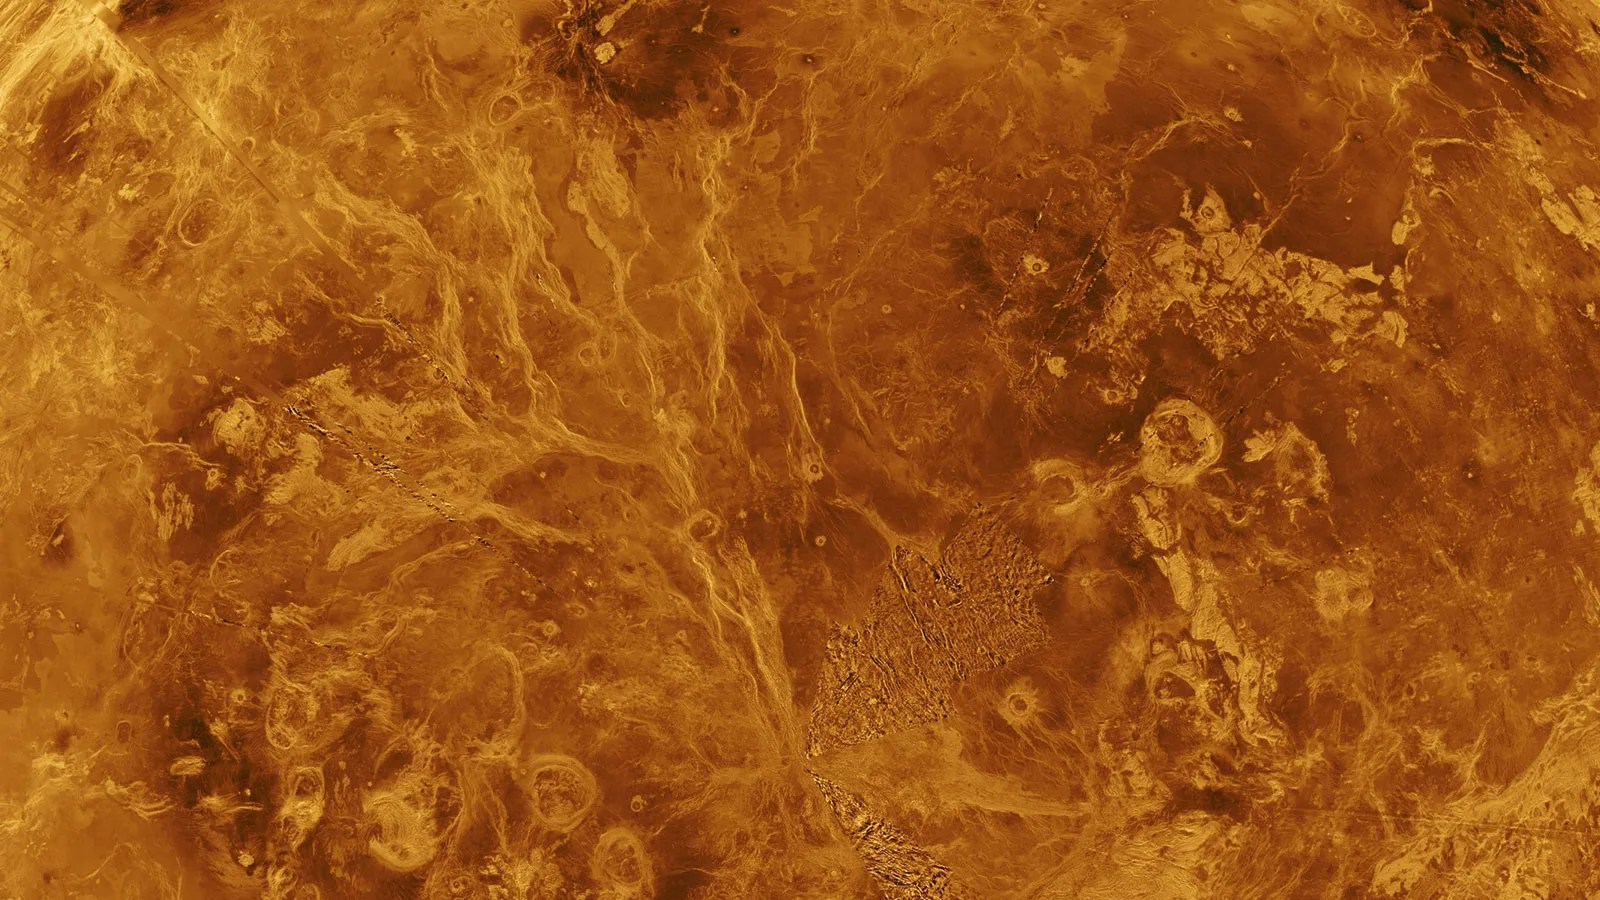 Close-up view of Venus showing a complex landscape of mountains, craters and lava flows.